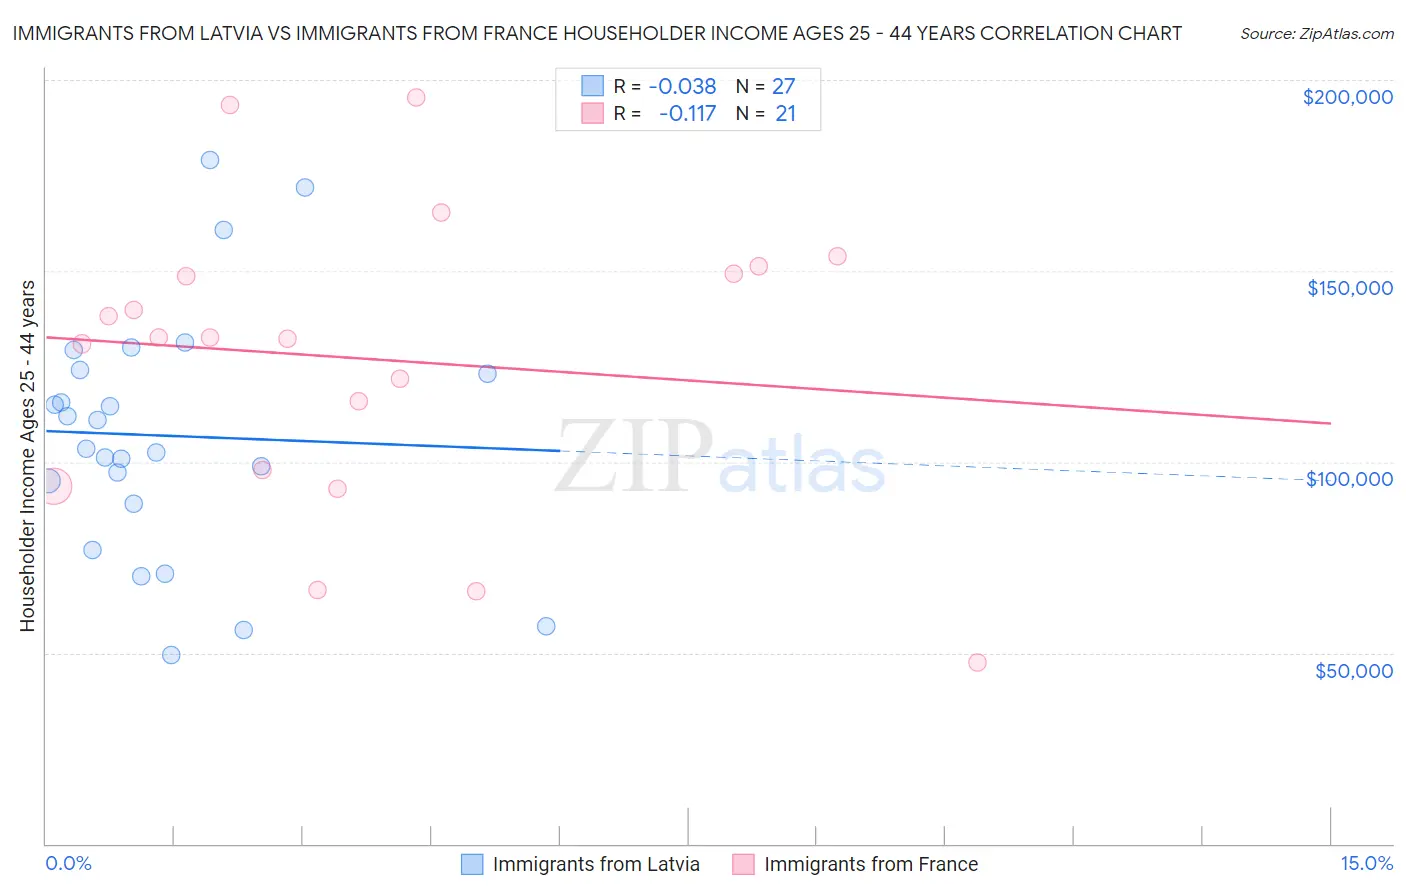 Immigrants from Latvia vs Immigrants from France Householder Income Ages 25 - 44 years